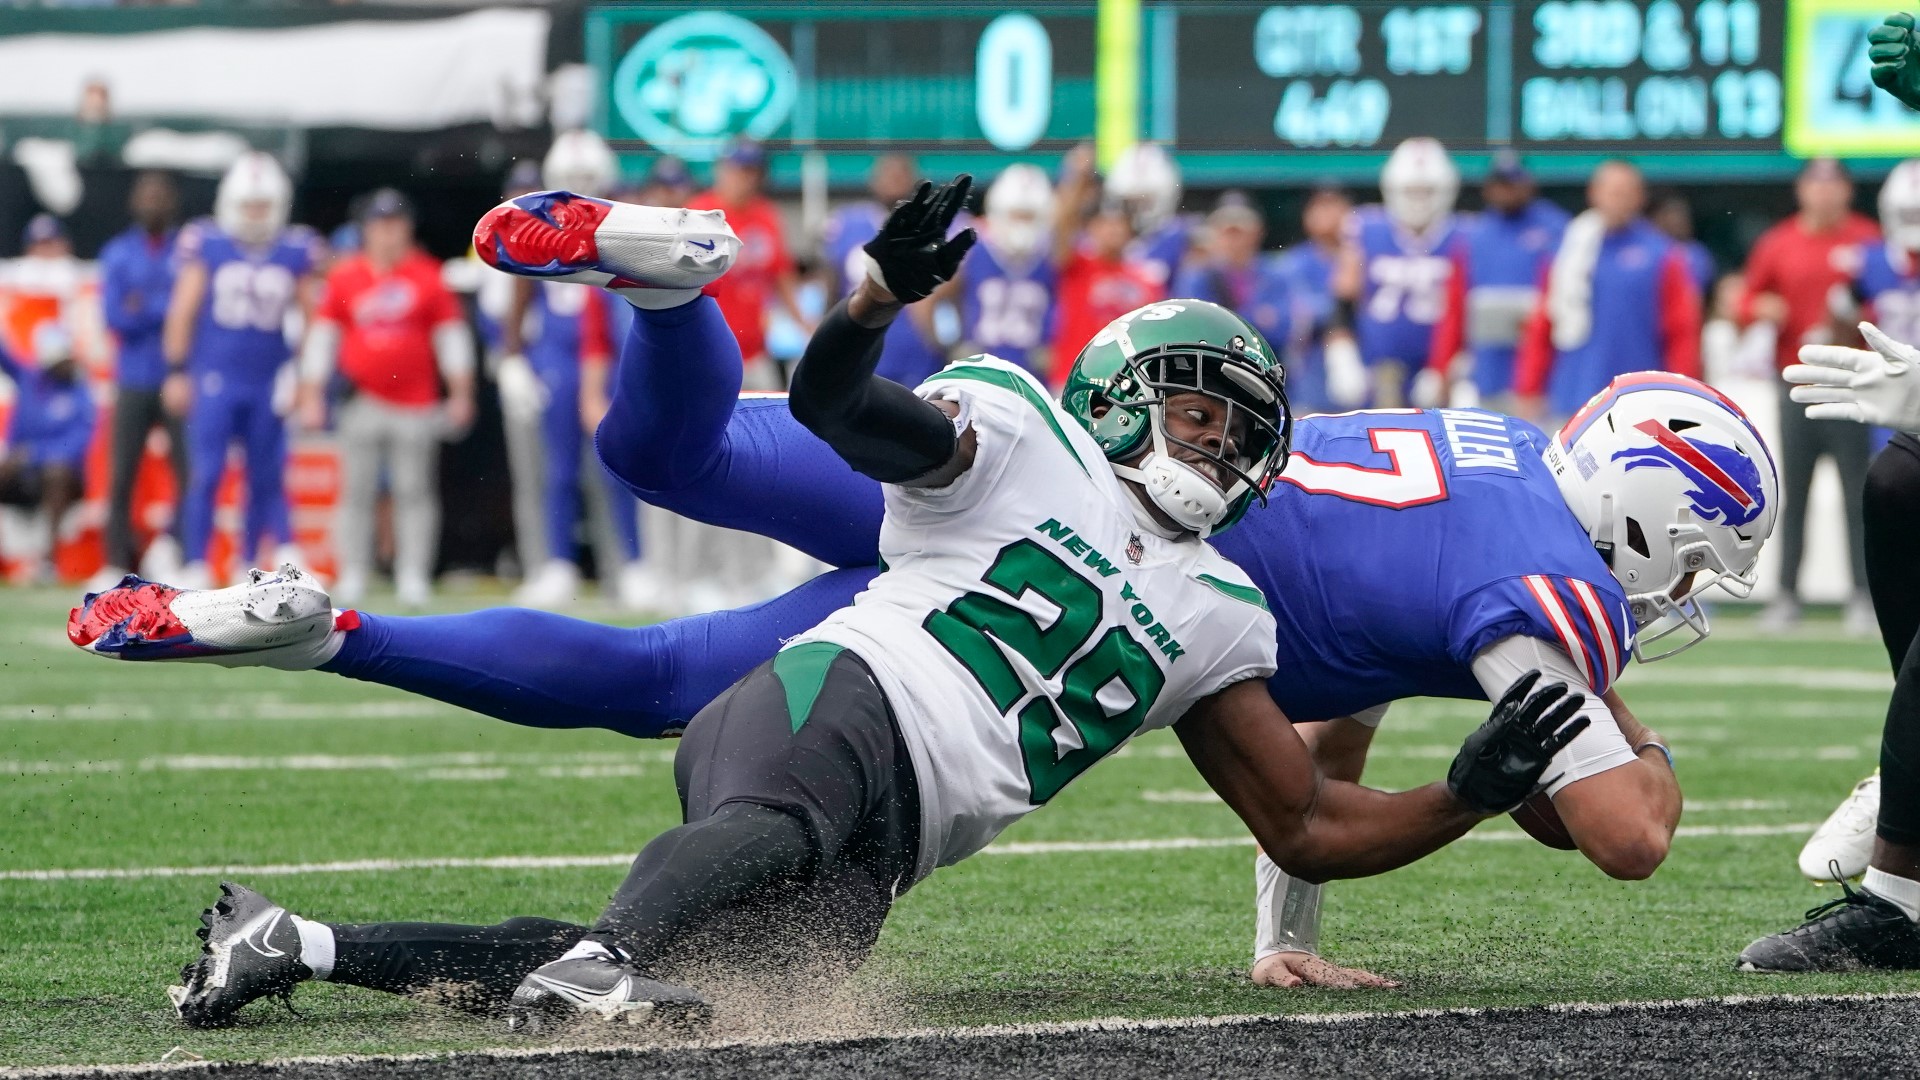 Bills-Jets game delayed briefly by a camera malfunction